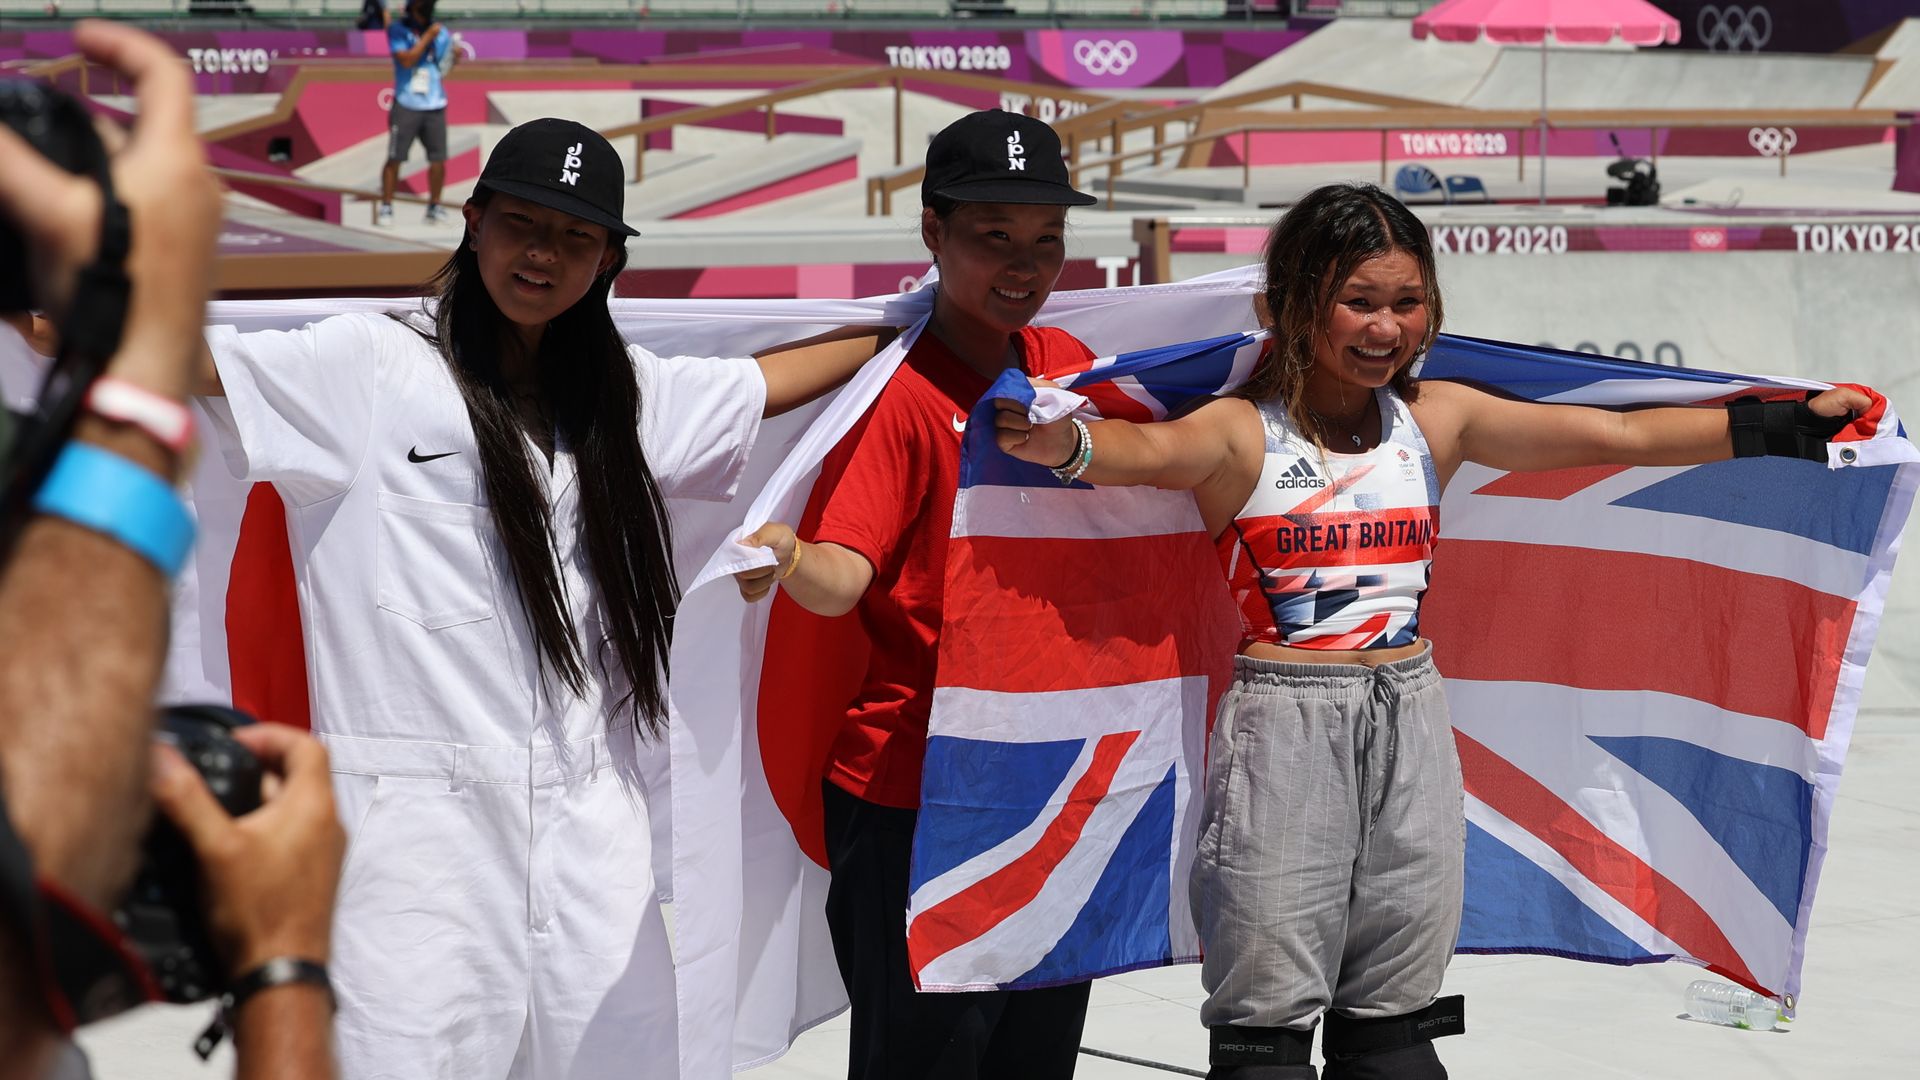 The Olympic skateboarding contest winners pose with their national flags